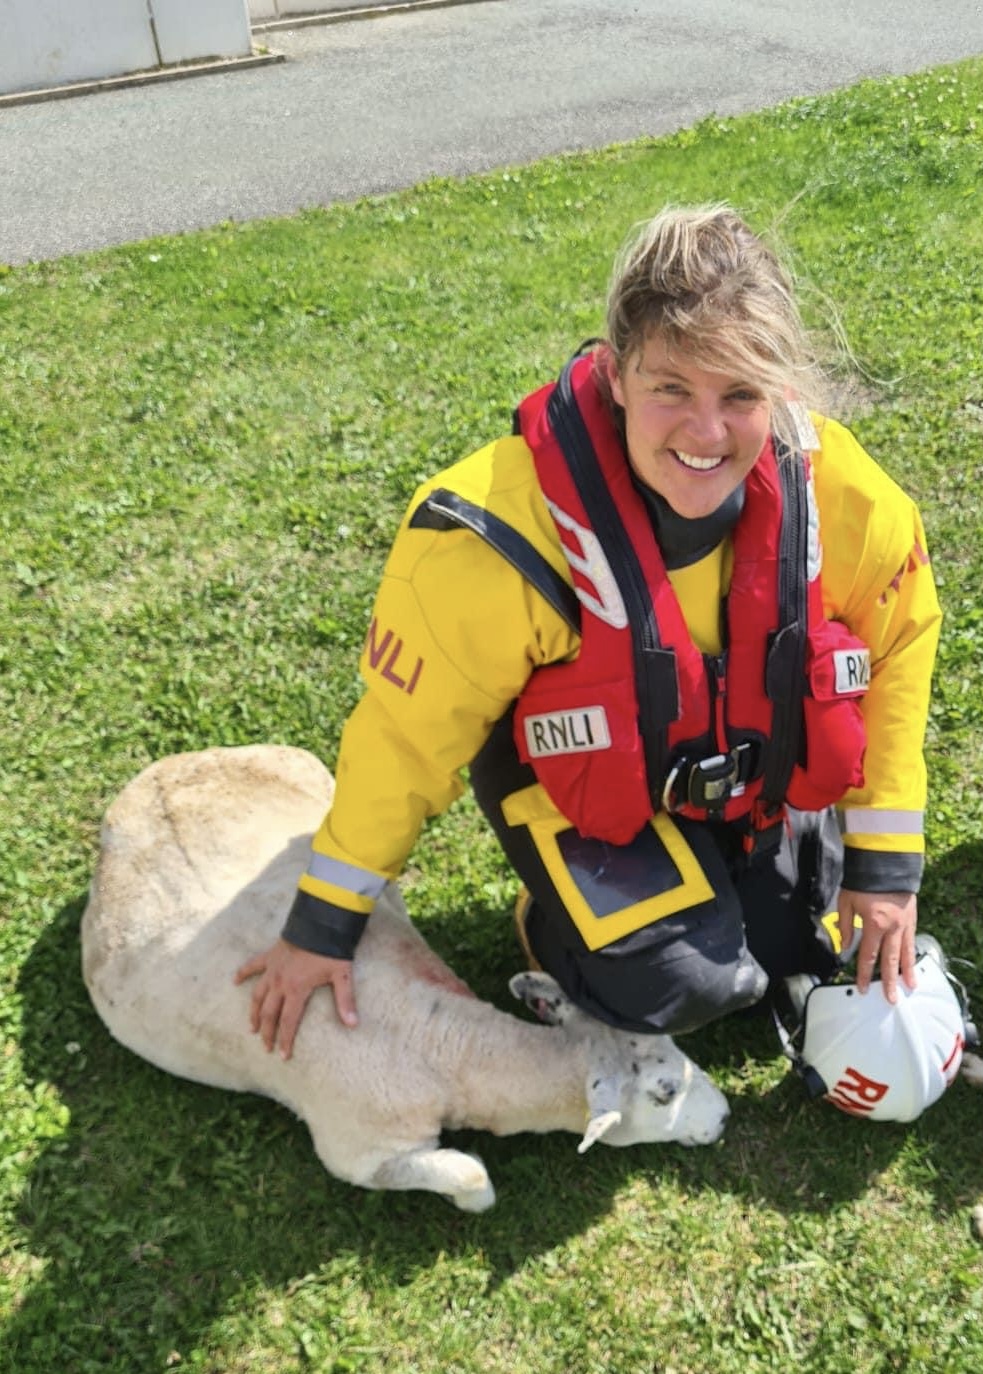 Sheep rescued from sandbank by RNLI